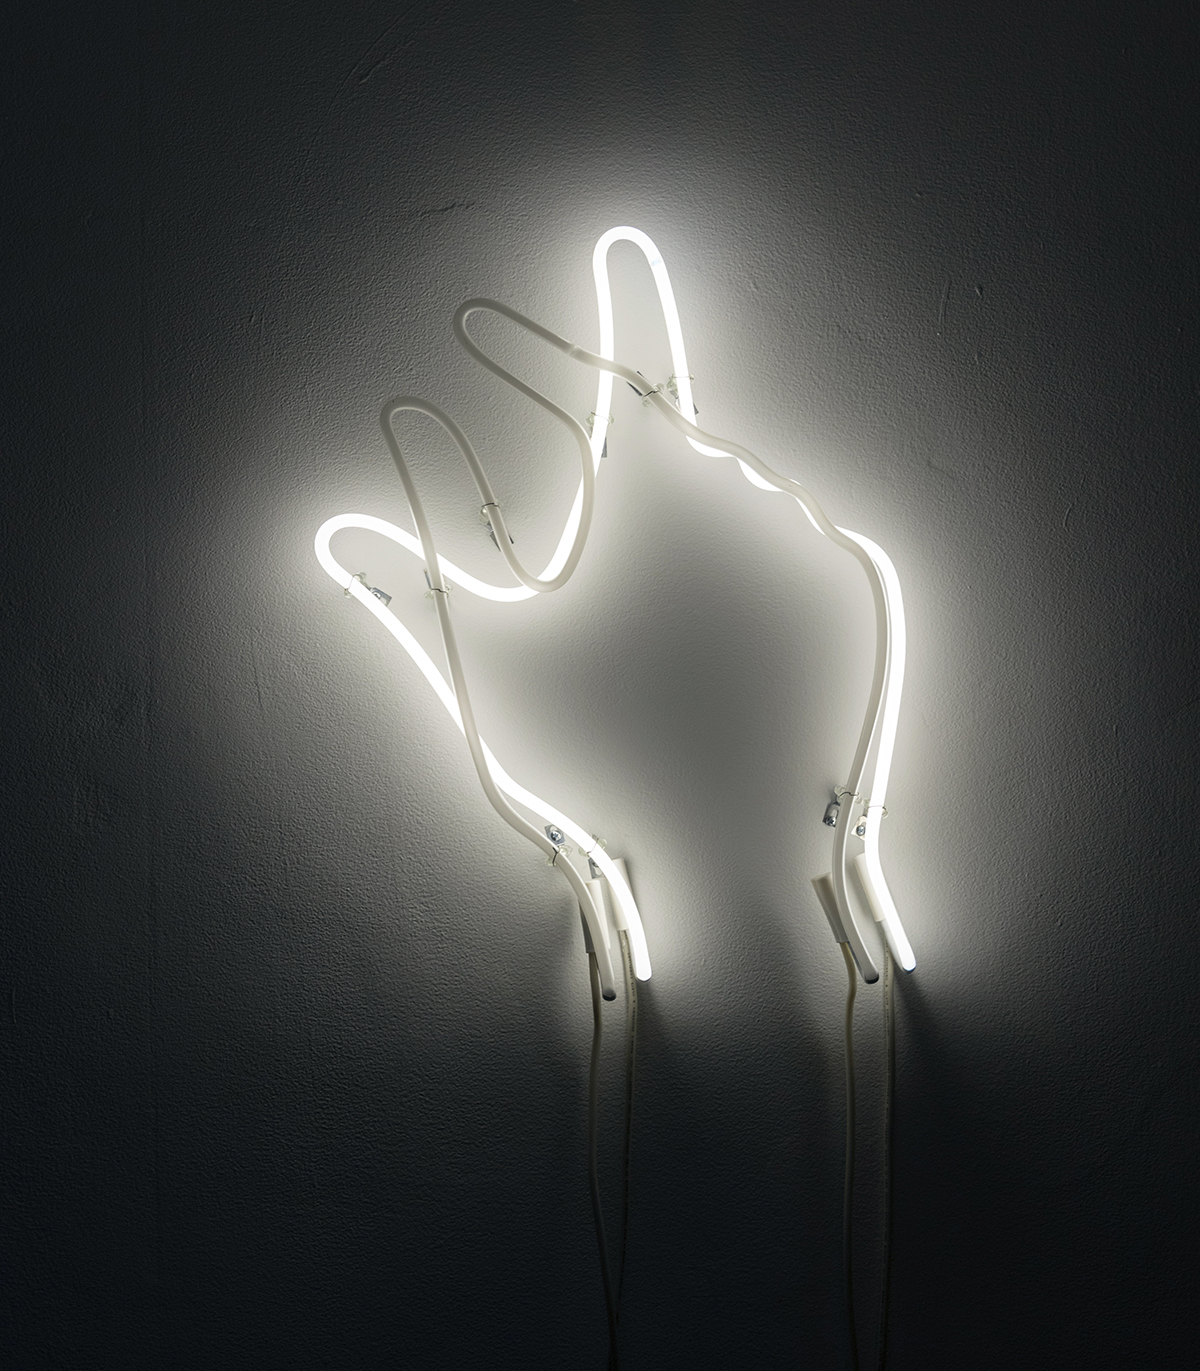 Neon light artwork depicting a hand pinching by Victoria Fu